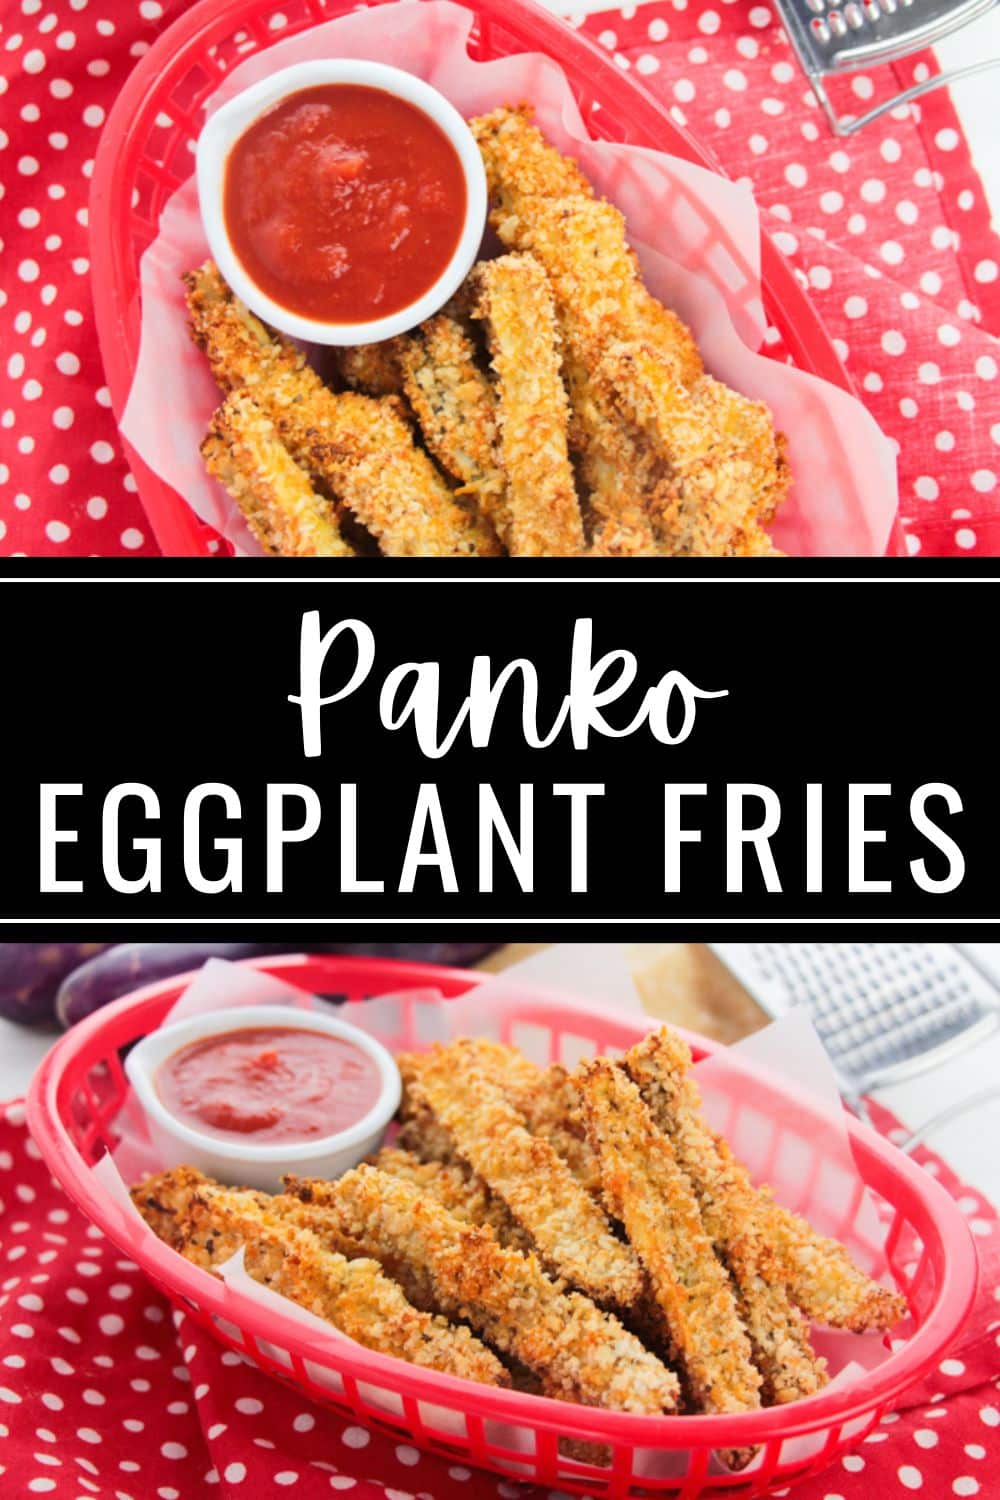 Crispy Panko eggplant fries served in a basket along with a delectable dipping sauce.